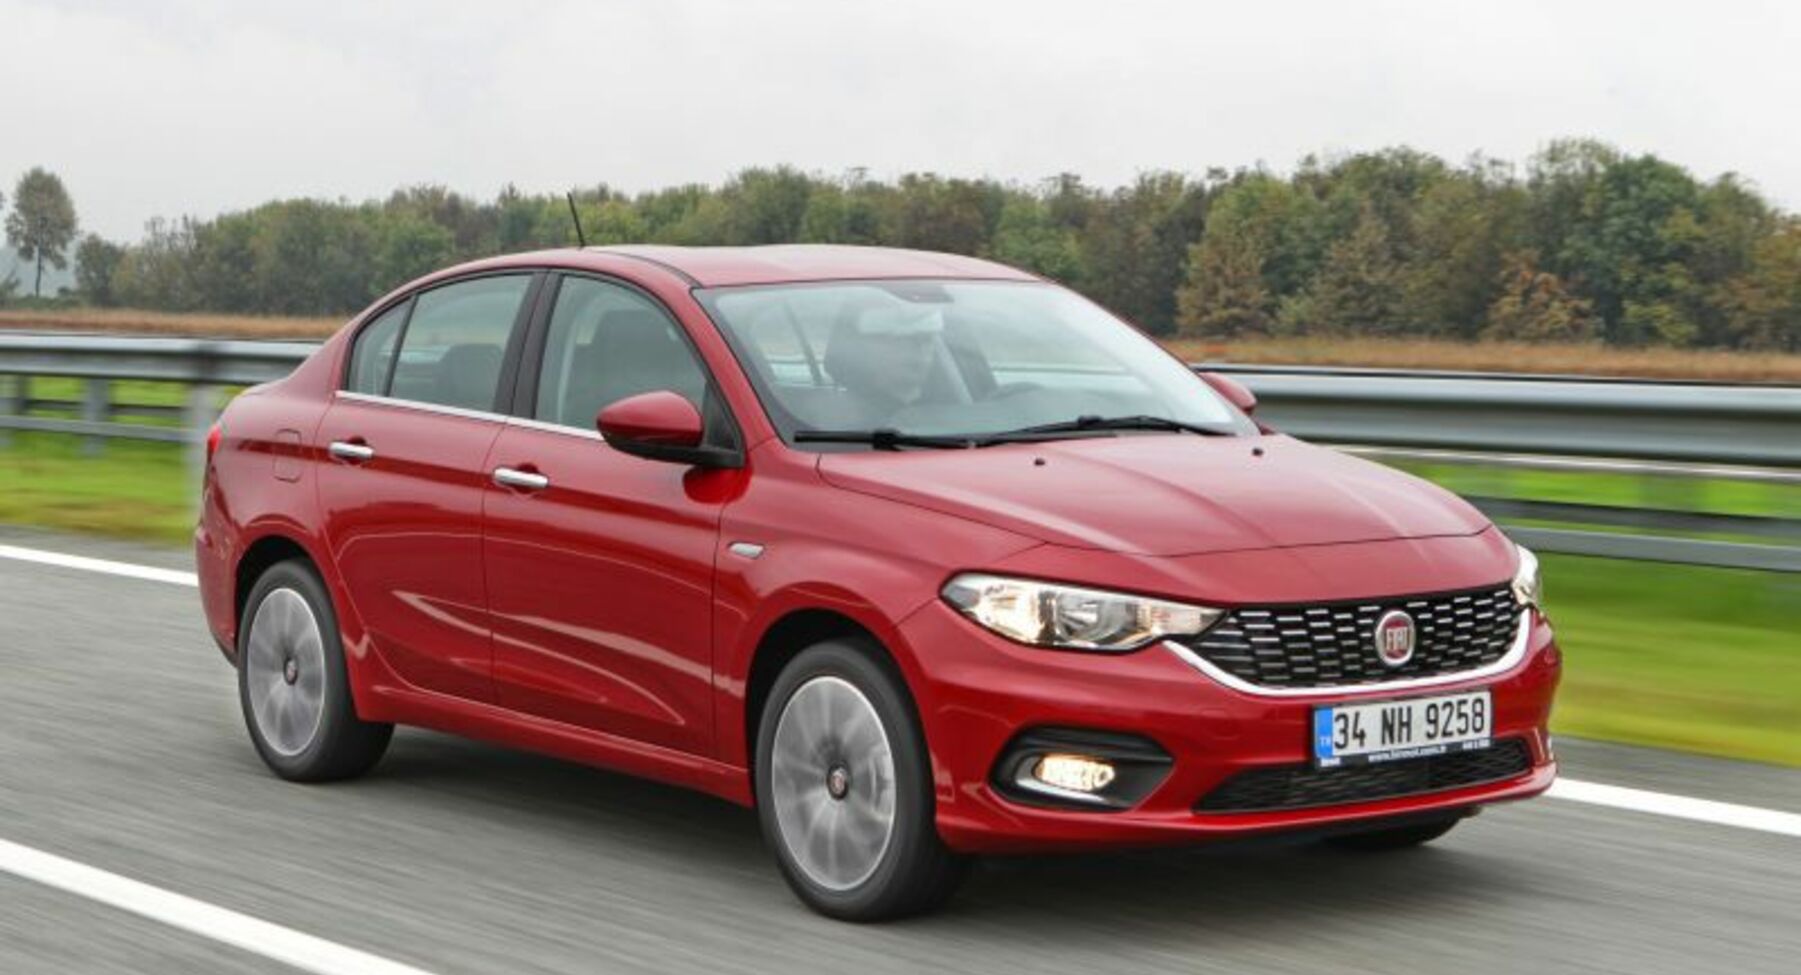 Fiat Tipo (356) 1.6 (110 Hp) Automatic 2015, 2016, 2017, 2018 